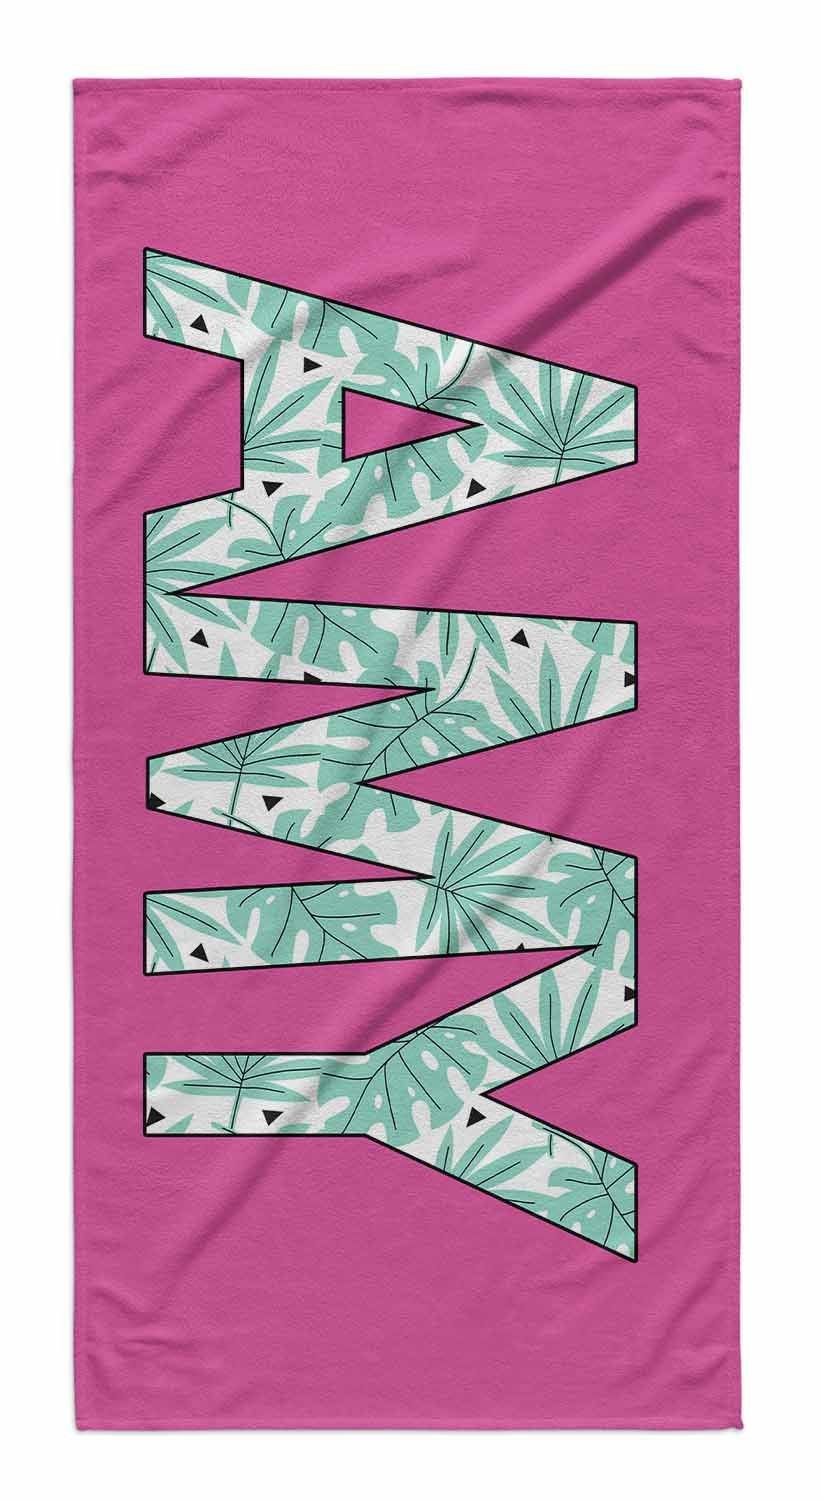 SOLID BOLD PATTERN NAME PERSONALIZED TOWEL - PALMS